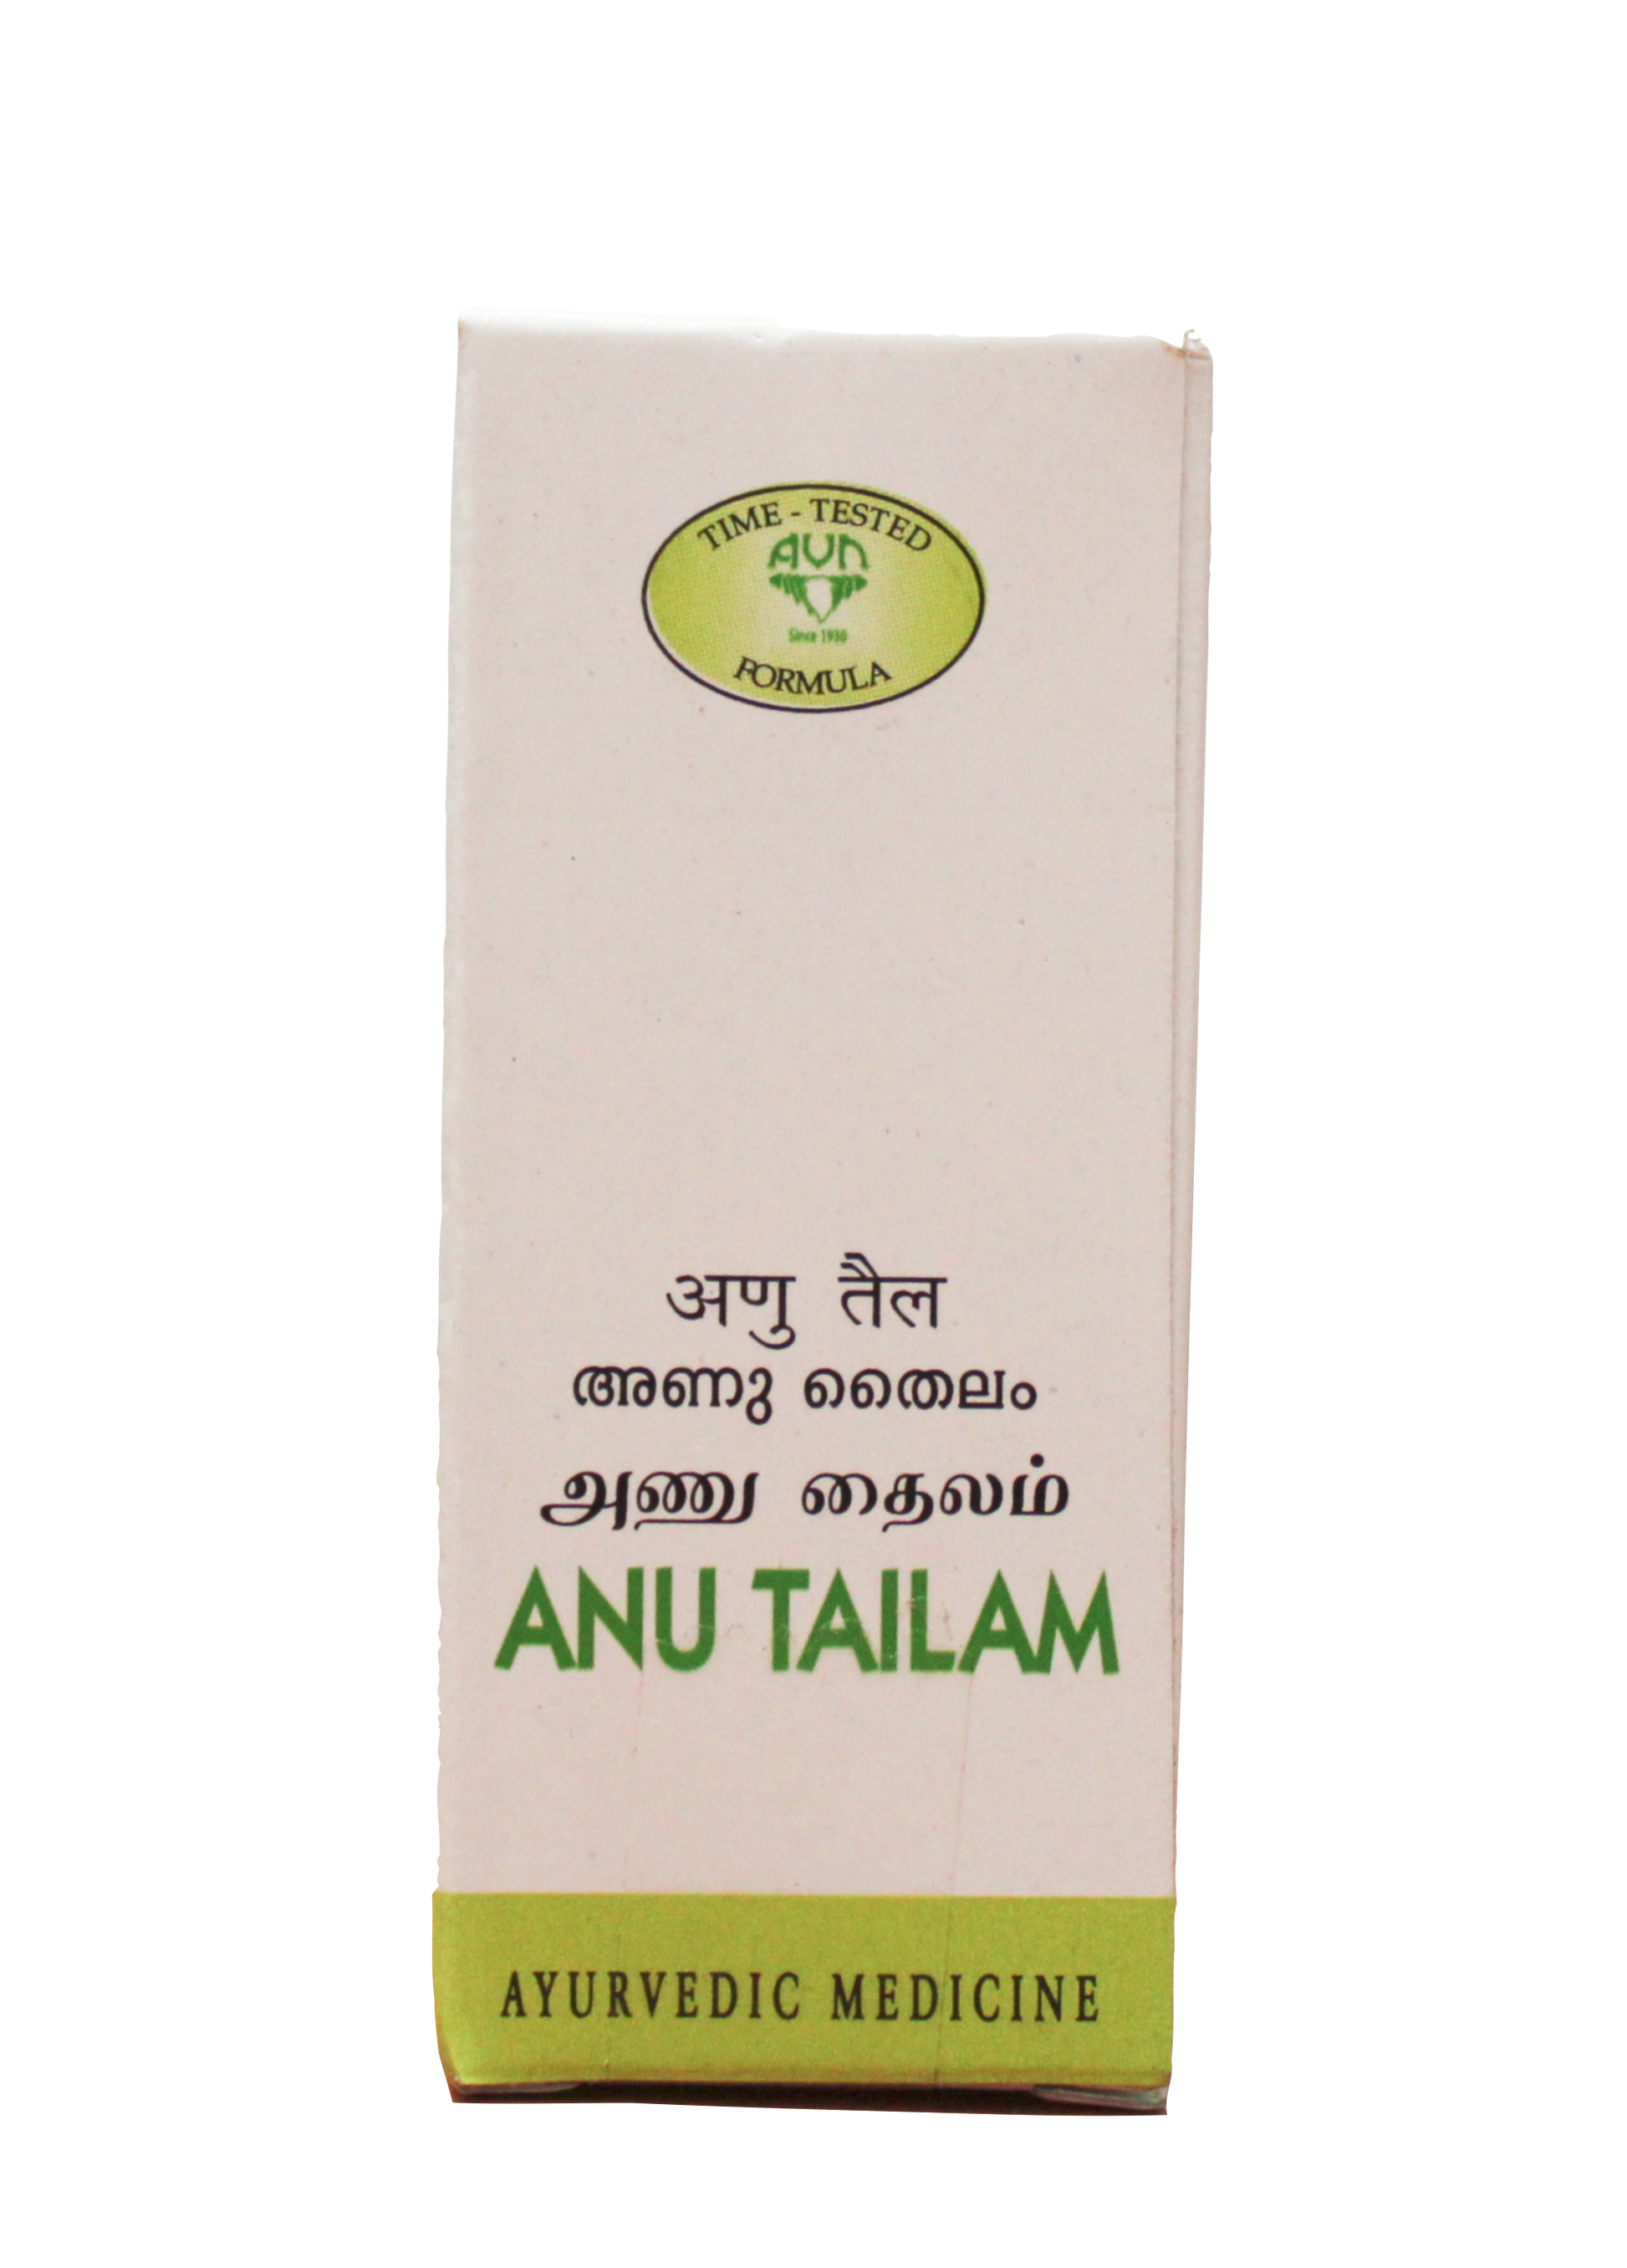 Shop Anu thailam 10ml at price 72.00 from AVN Online - Ayush Care